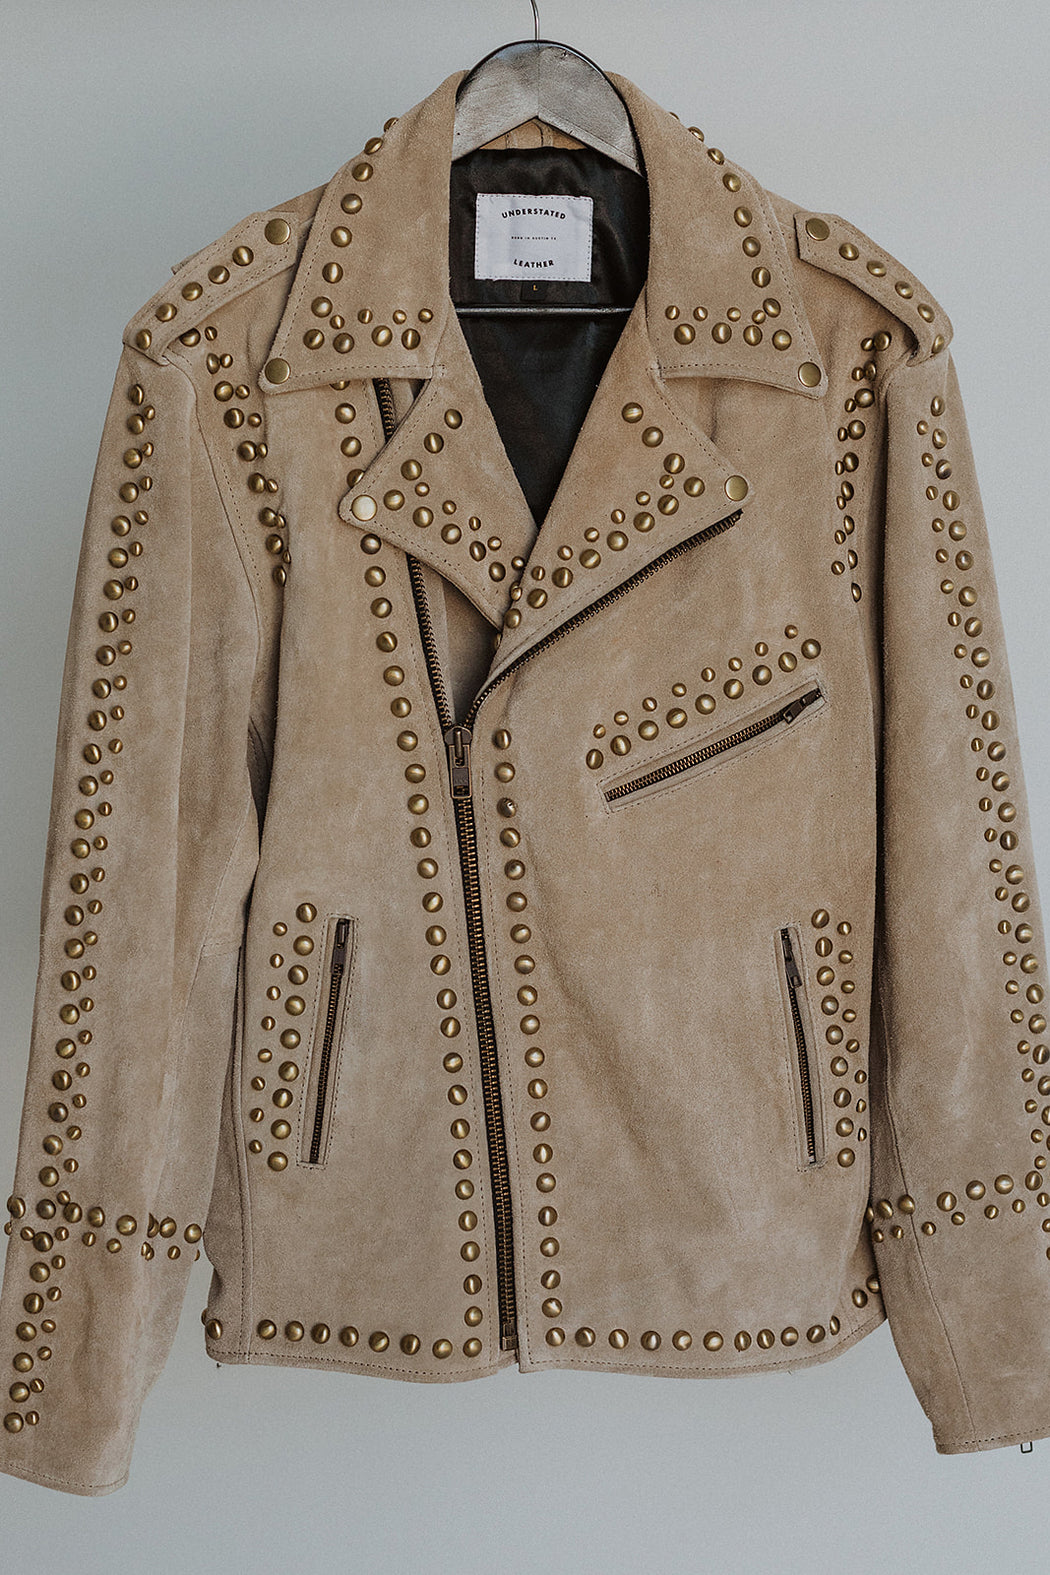 MENS DUST STUDDED SUEDE EASY RIDER